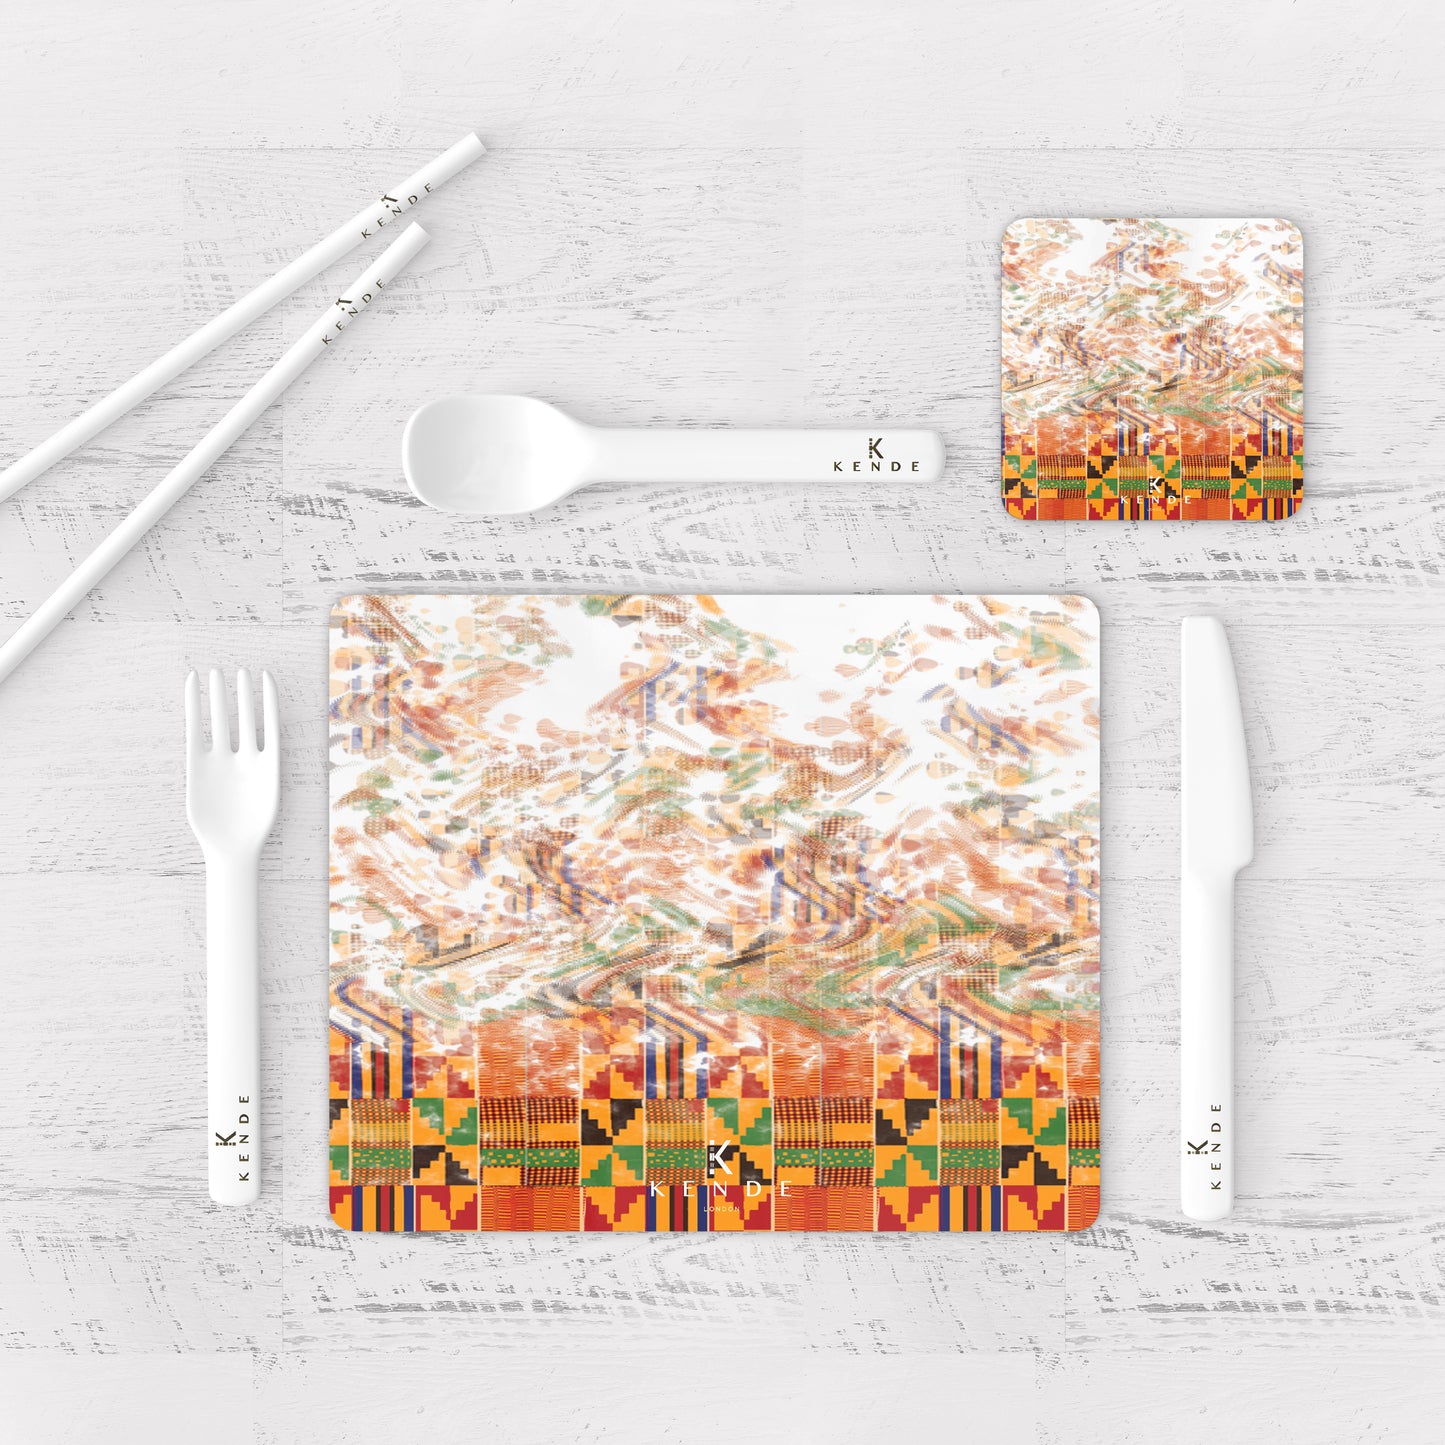 Zaina Flame Placemats and Coasters